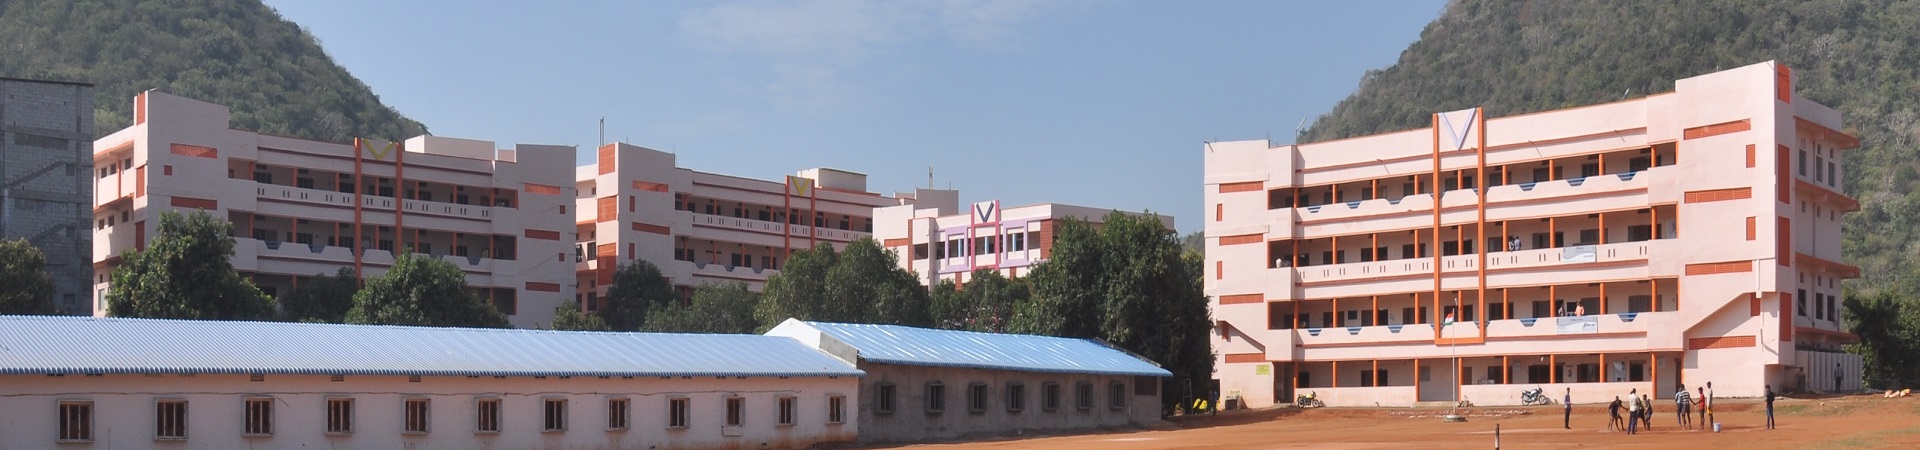 Vikas Group of Institutions Image